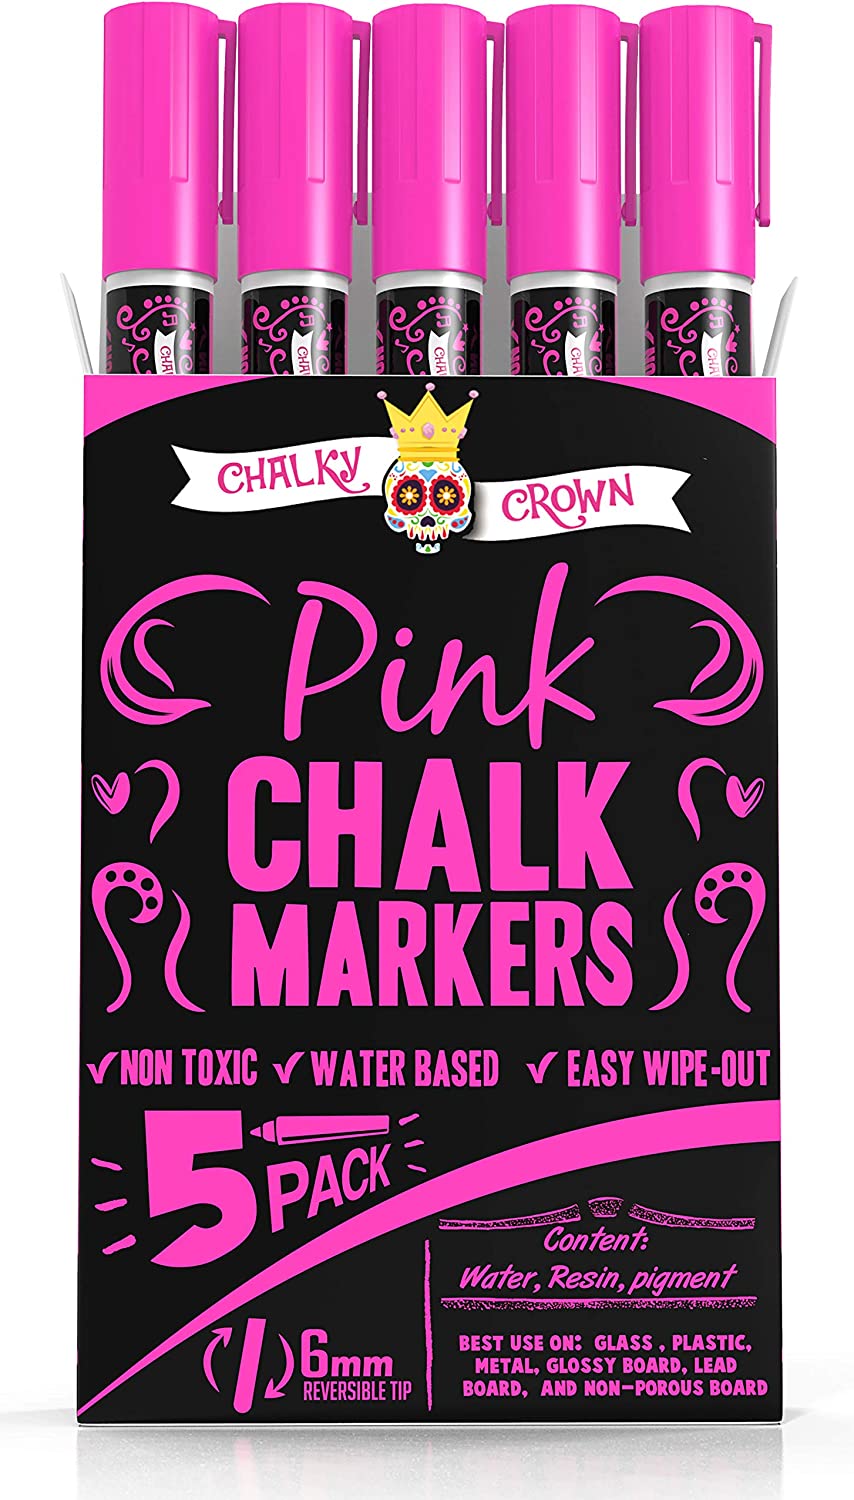 Bold Crafts Liquid Chalk Markers- Pack of 25 Erasable Neon, Classic,  Metallic Colors with 6mm Reversible Tips (Chisel, Bullet), 24 Chalkboard  Labels